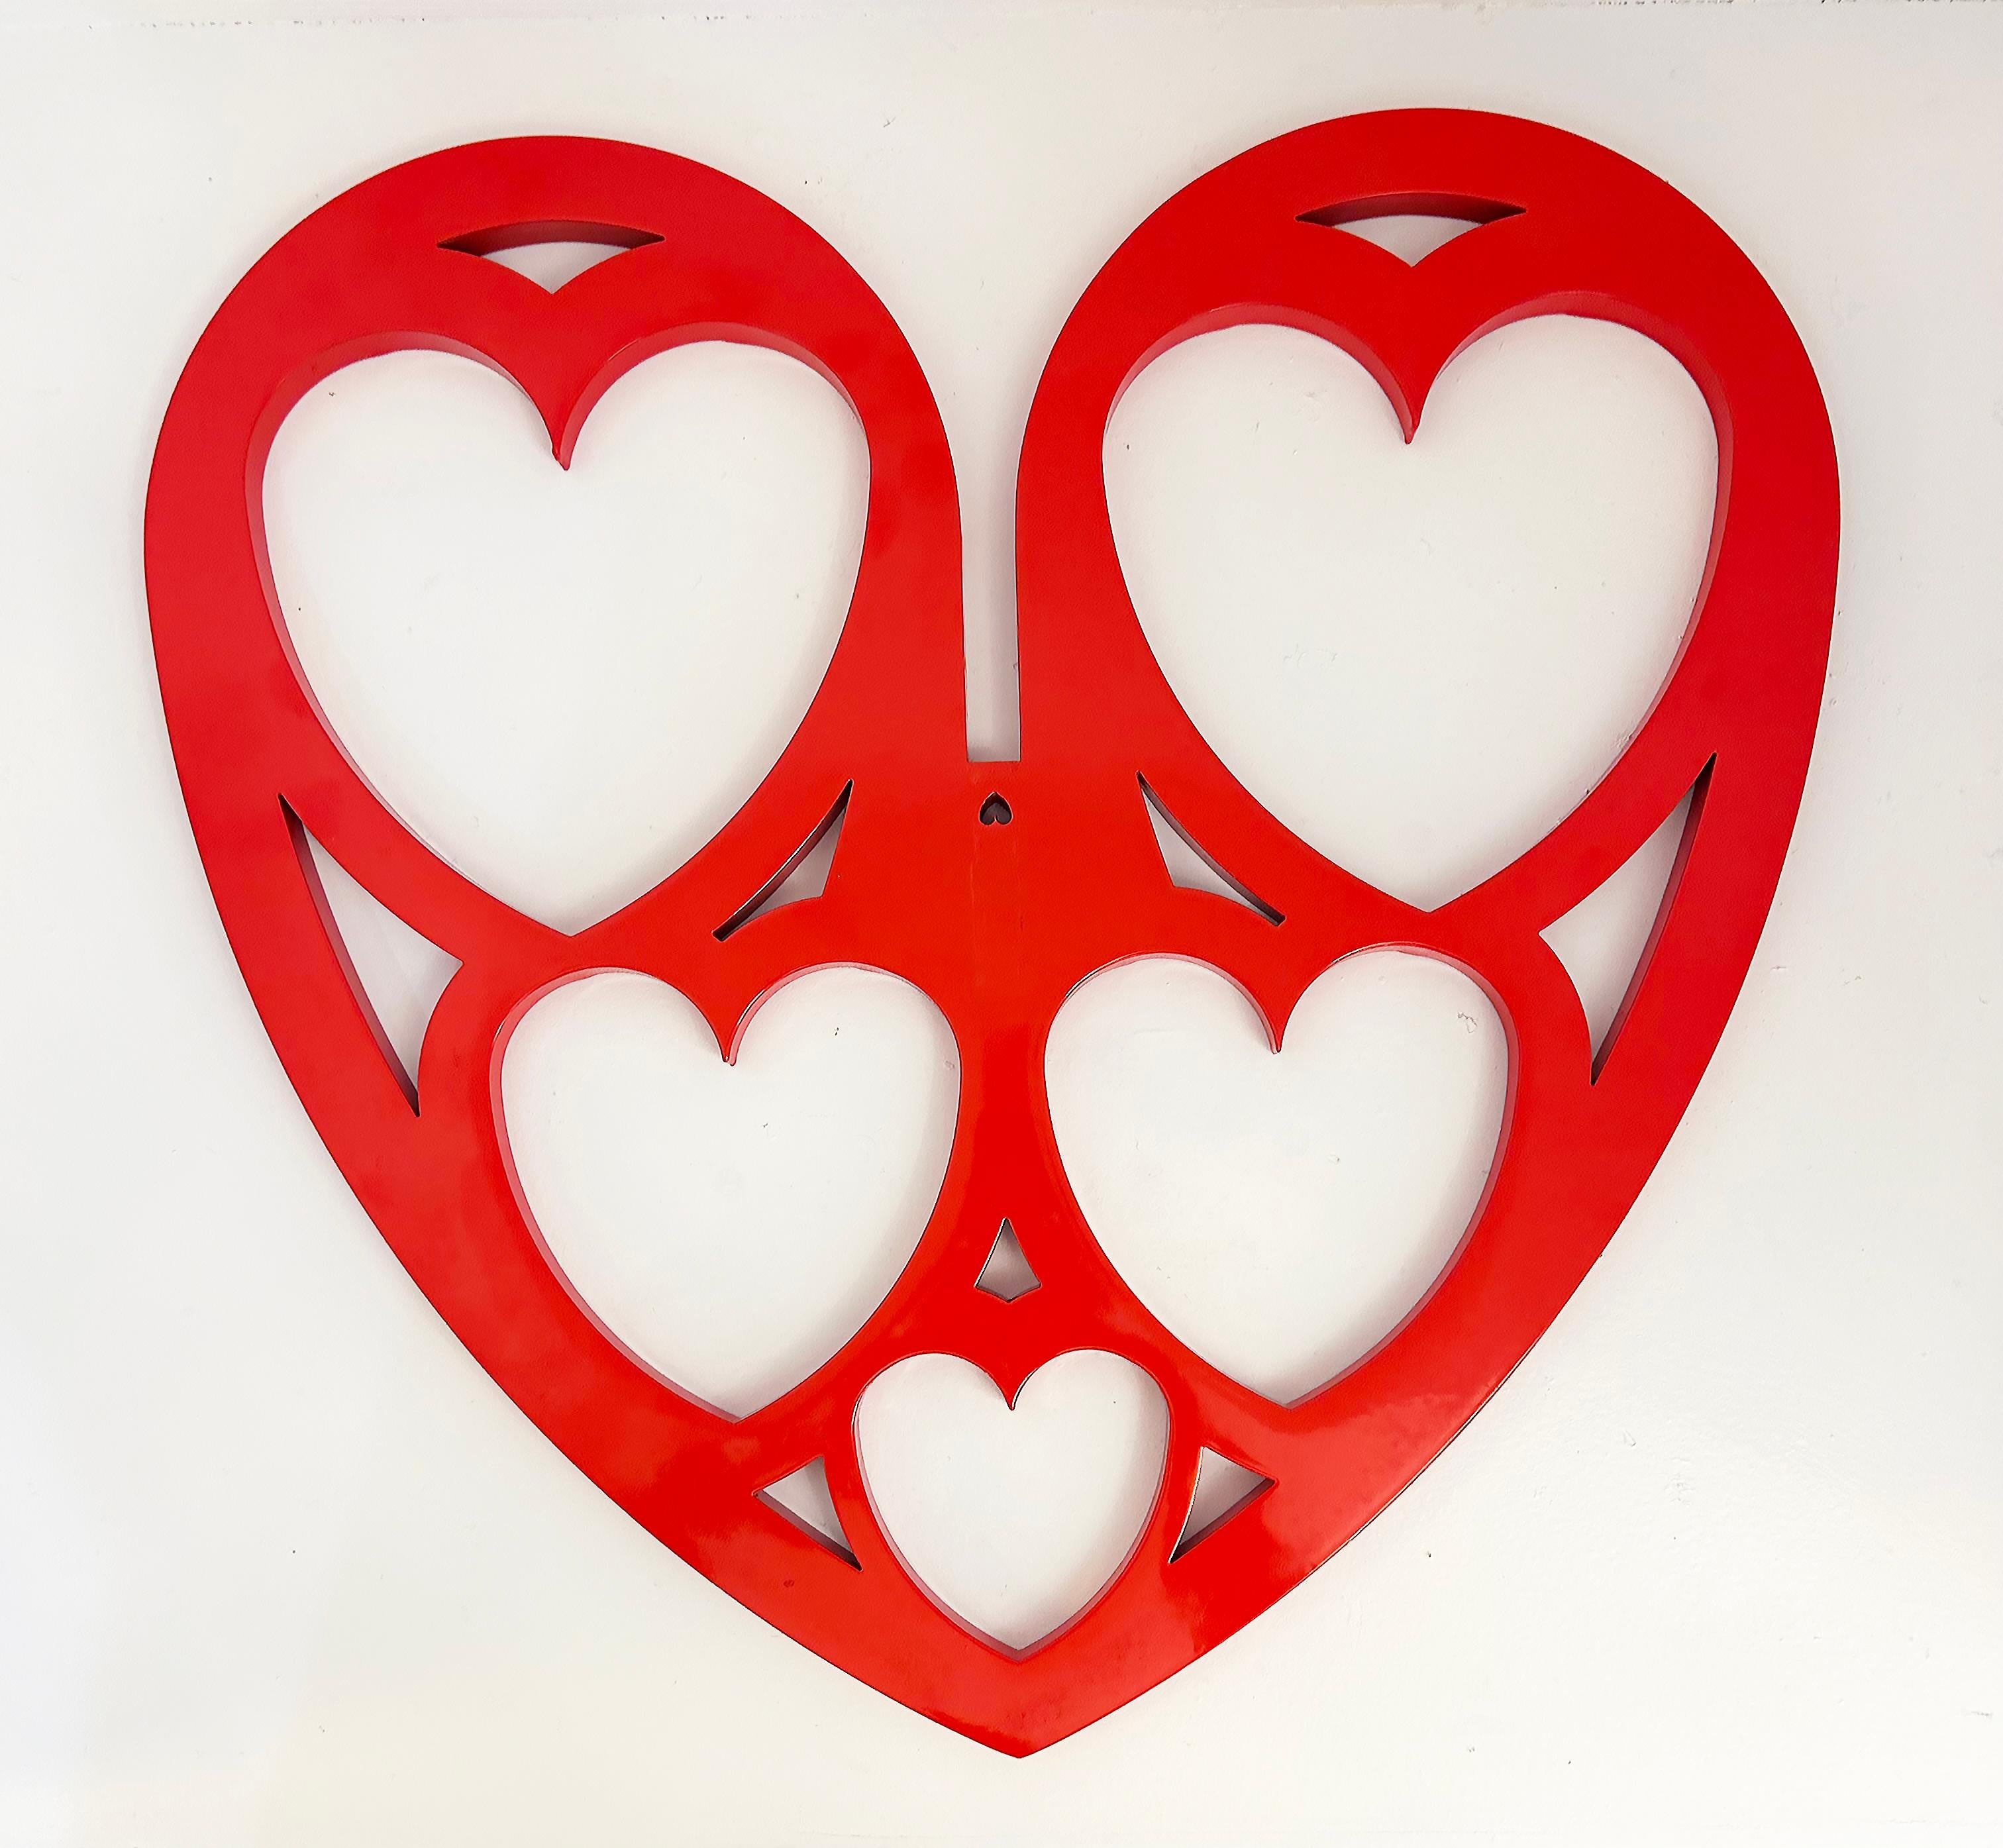 Interlocking Hearts Powder-coated Aluminum Lace Sculpture by Michael Gitter For Sale 2